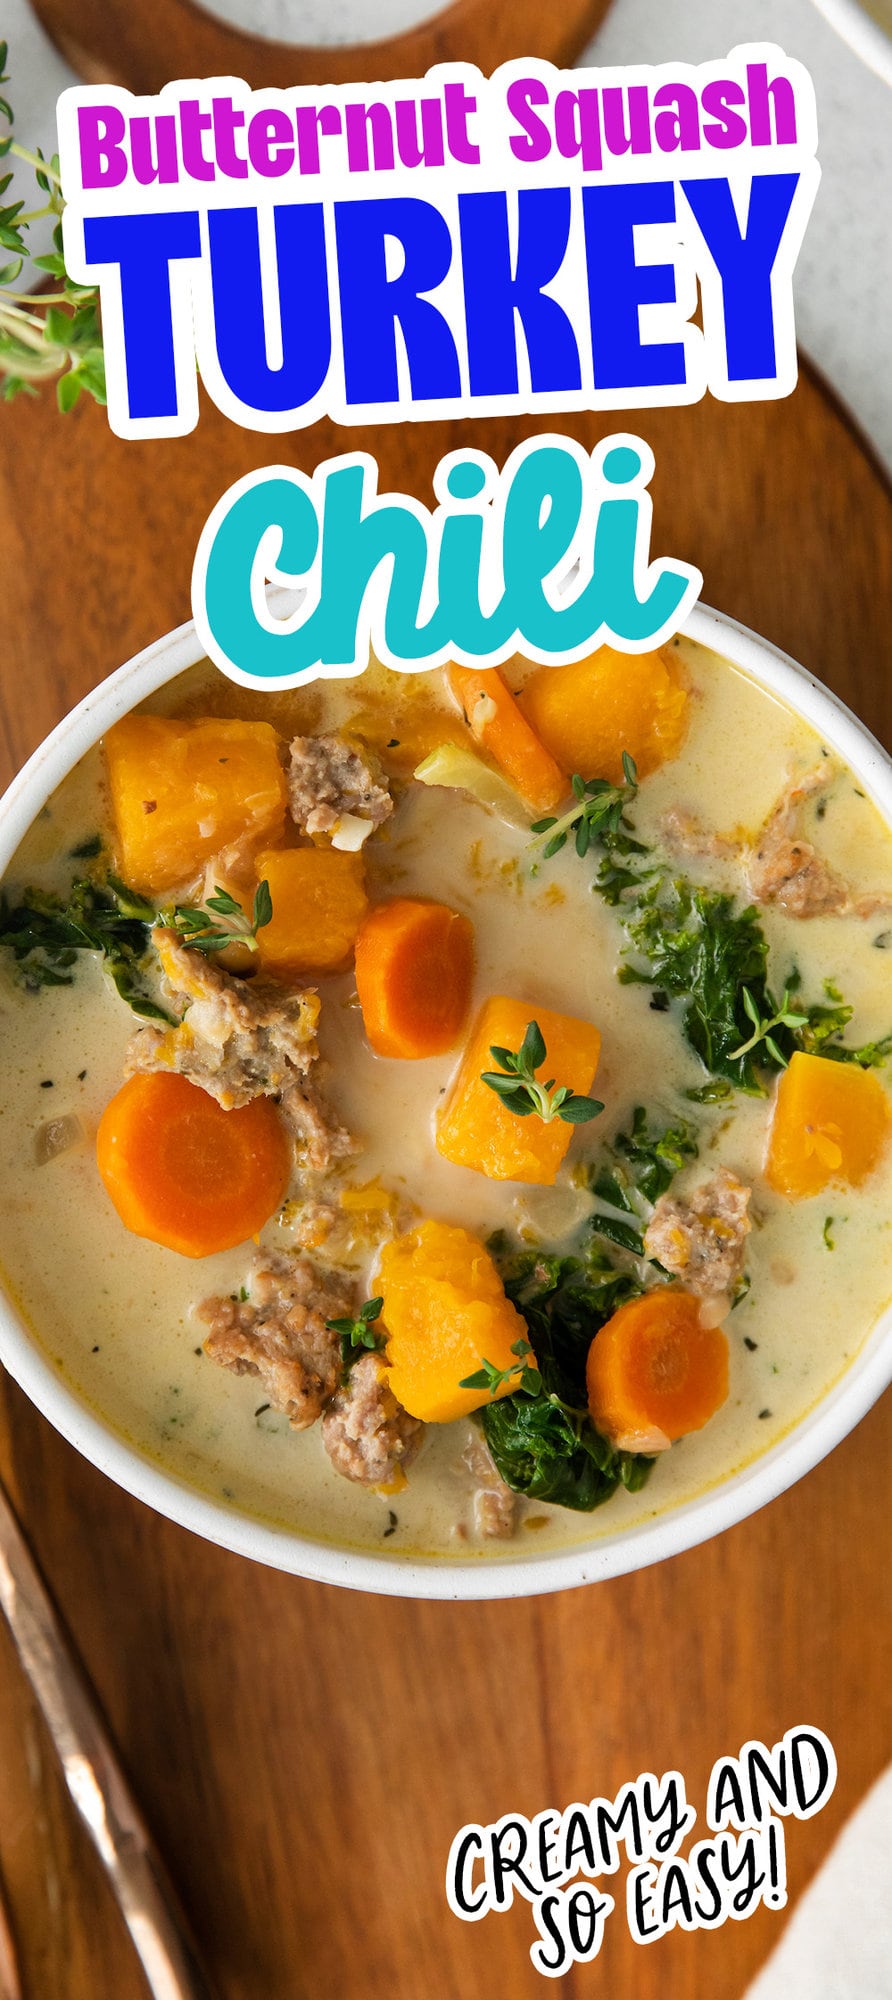 picture of creamy turkey and butternut squash chili with carrots, thyme, kale, and peppers in a white bowl on a table